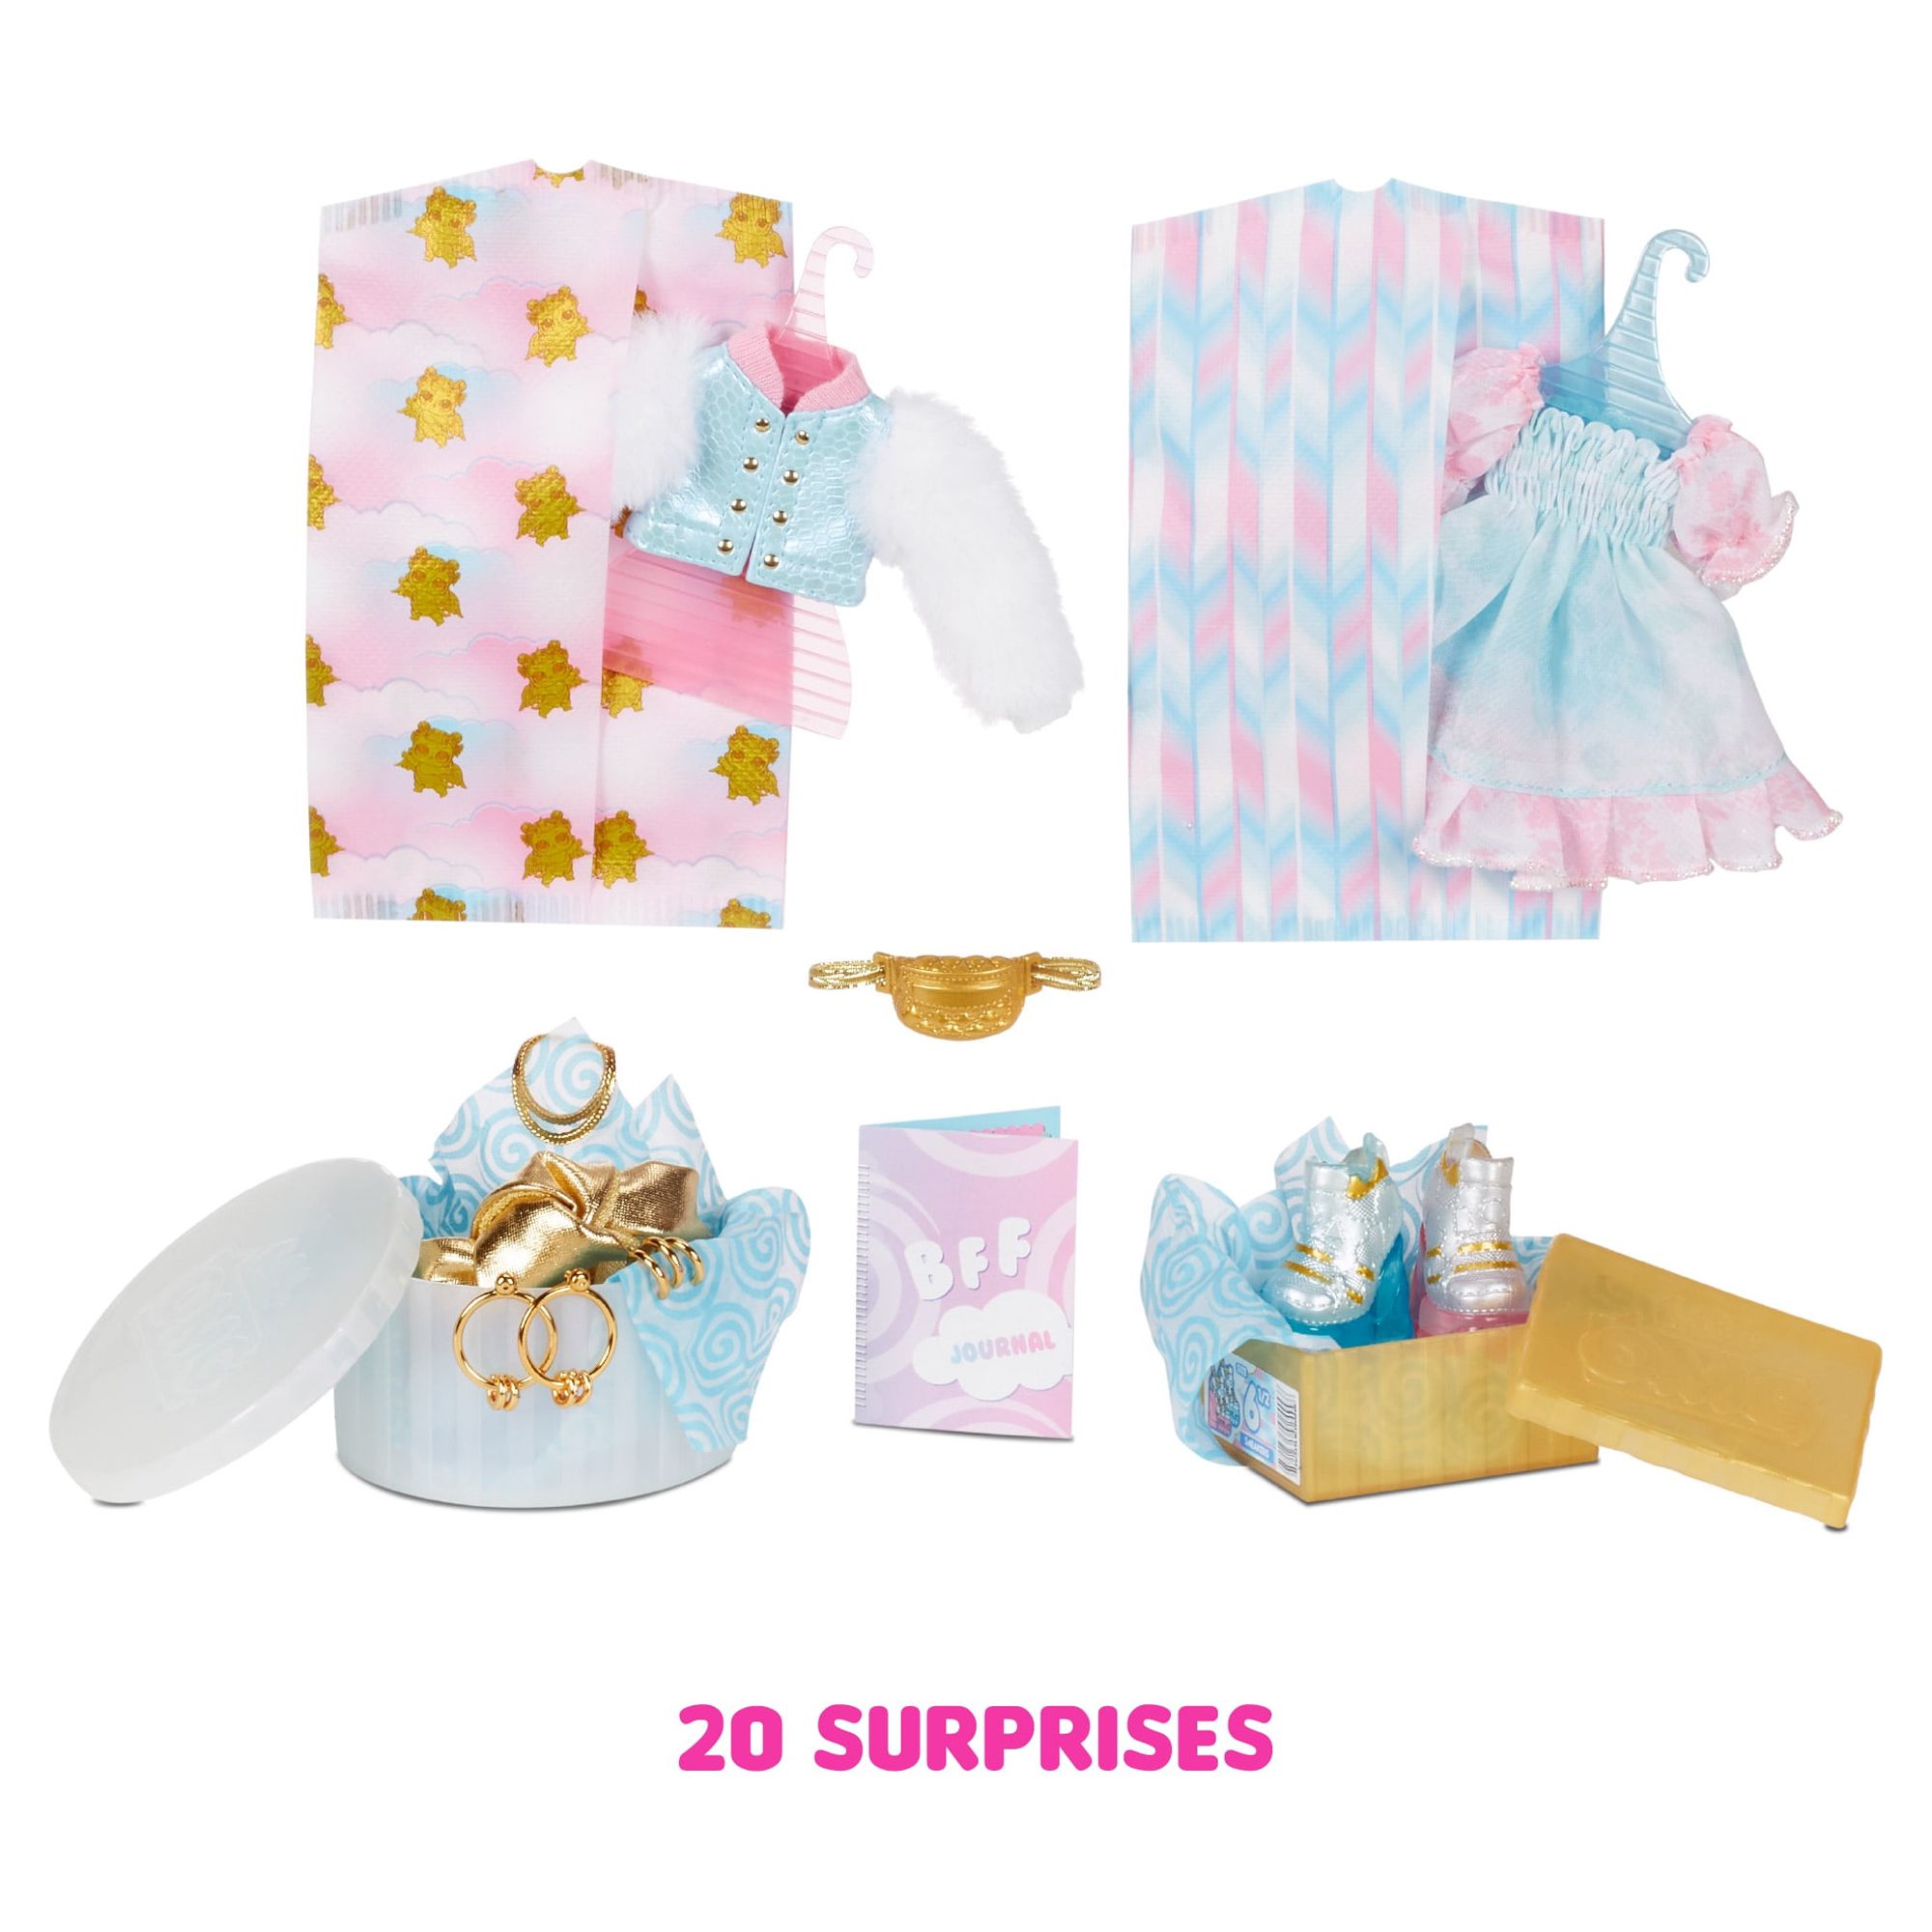 LOL Surprise OMG Sweets Fashion Doll - Dress Up Doll Set with 20 Surprises for Girls and Kids 4+ - image 5 of 8